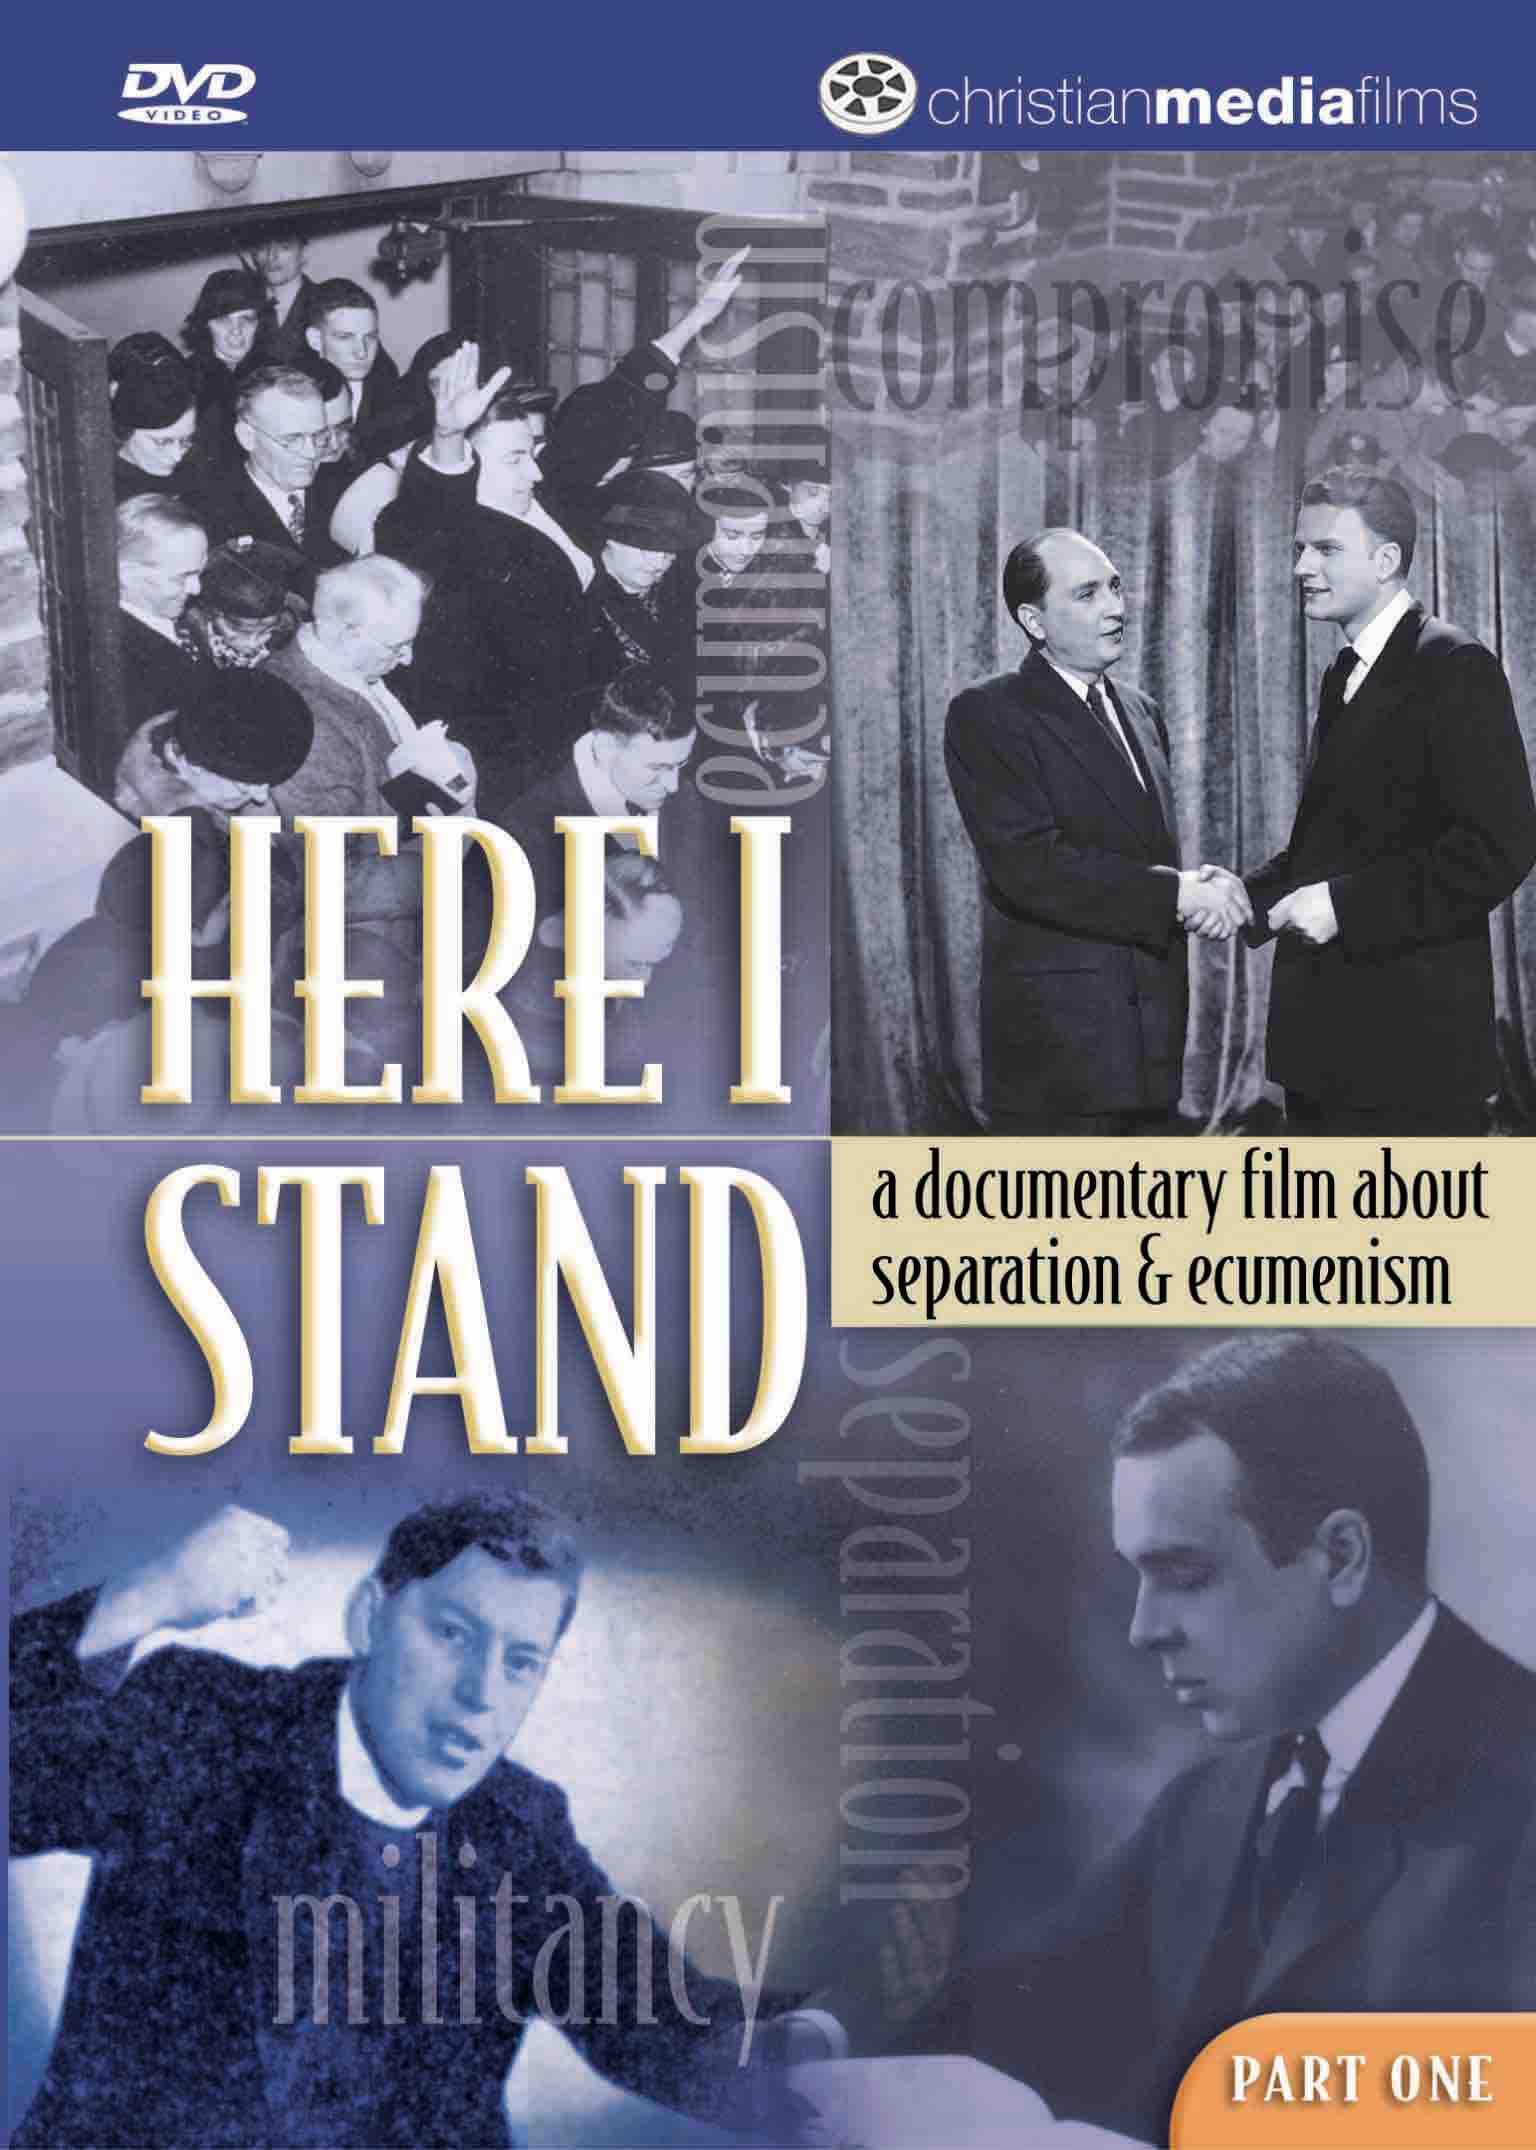 HereIStand_sleeve_Cover1small